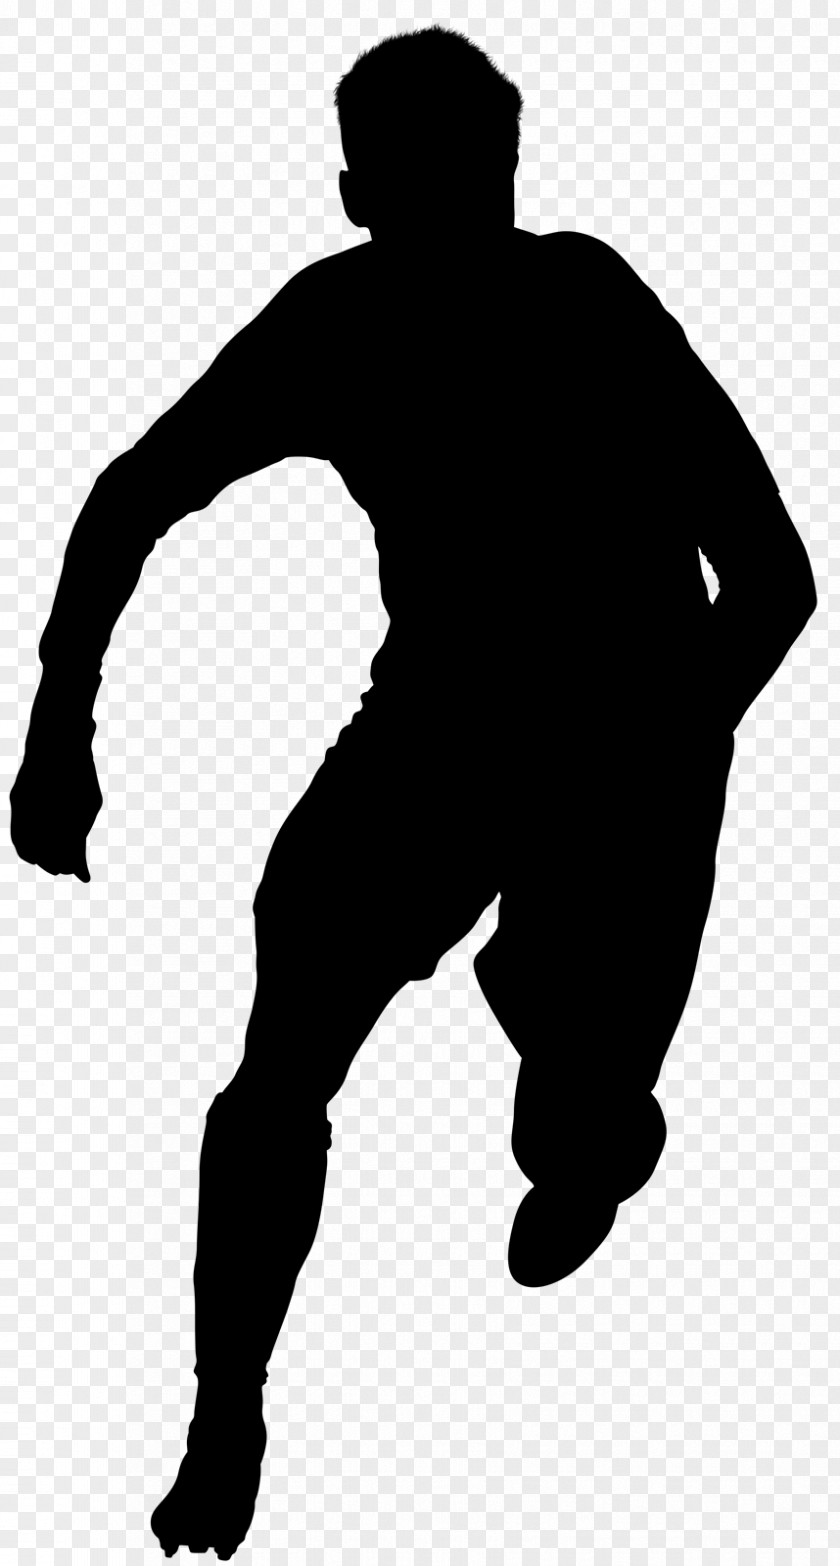 Silhouette Image Transparency Clip Art PNG